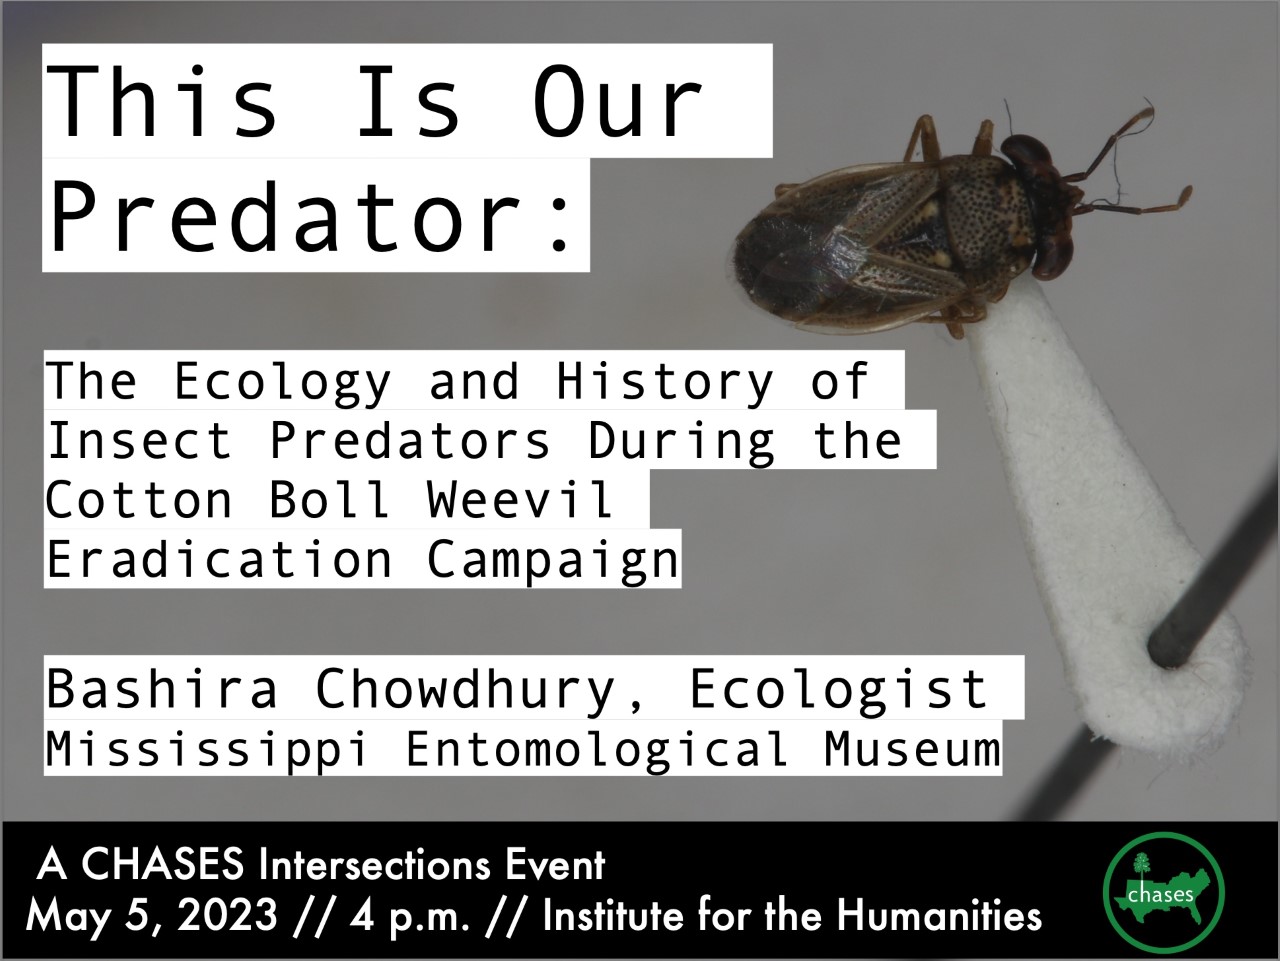 CHASES Sponsors an Intersections Event: "This Is Our Predator: The Ecology and History of Insect Predators During the Cotton Boll Weevil Eradication Campaign" By Dr. Bashira Chowdhury. Friday, May 5, 2023 at 4 pm at Institute for the Humanities.